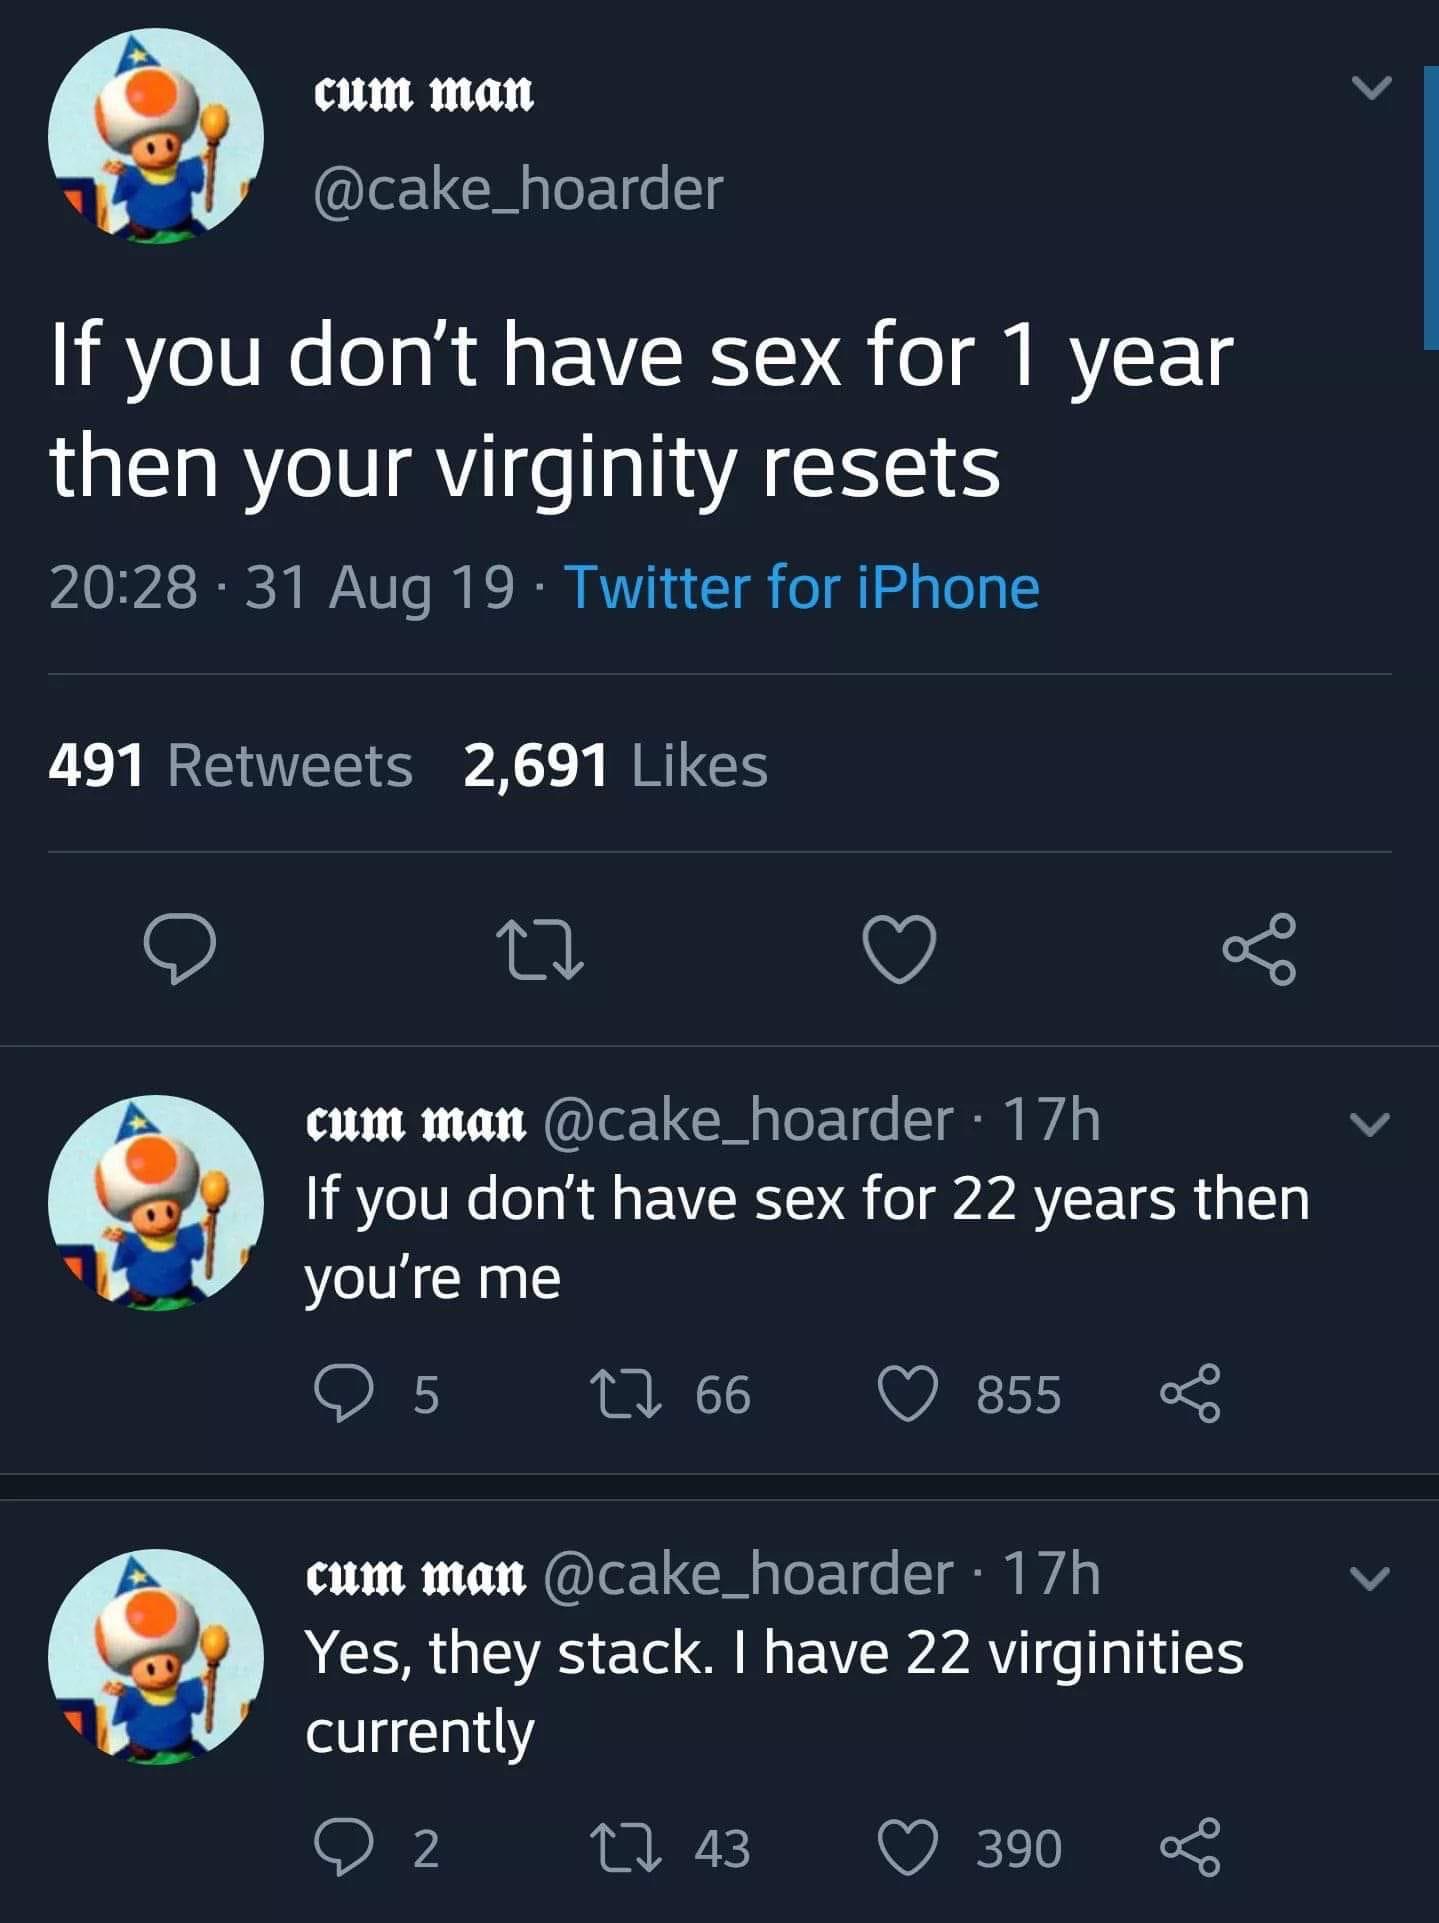 depression depression-memes depression text: cum man @cake_hoarder If you don't have sex for 1 year then your virginity resets 20:28 • 31 Aug 19 • Twitter for iPhone Likes 2,691 491 Retweets @cake_hoarder • 1 7h cum man If you don't have sex for 22 years then you're me 66 0 855 < @cake_hoarder • 1 7h cum man Yes, they stack. I have 22 virginities currently 43 0 390 < 